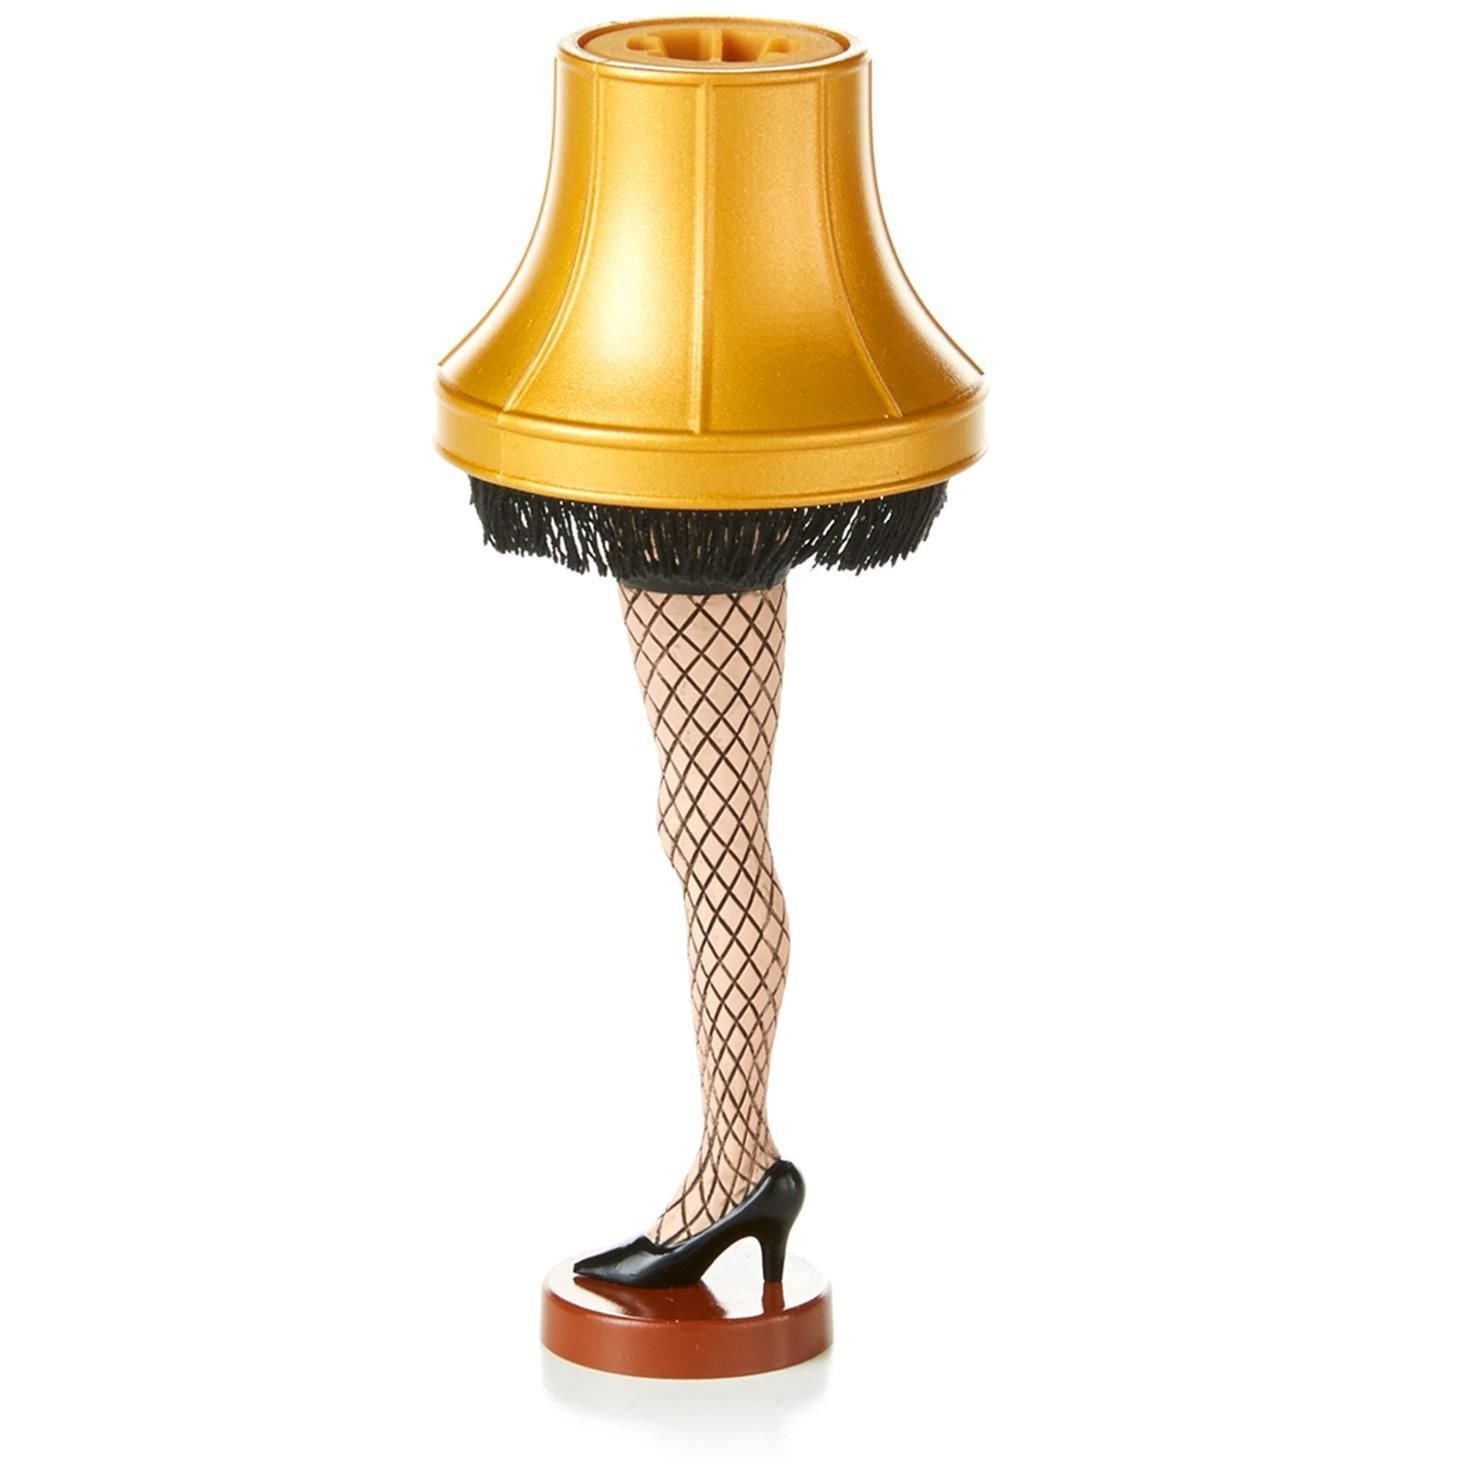 Christmas Story Leg Lamp Amazon
 15 Last Minute Gifts for Under $20